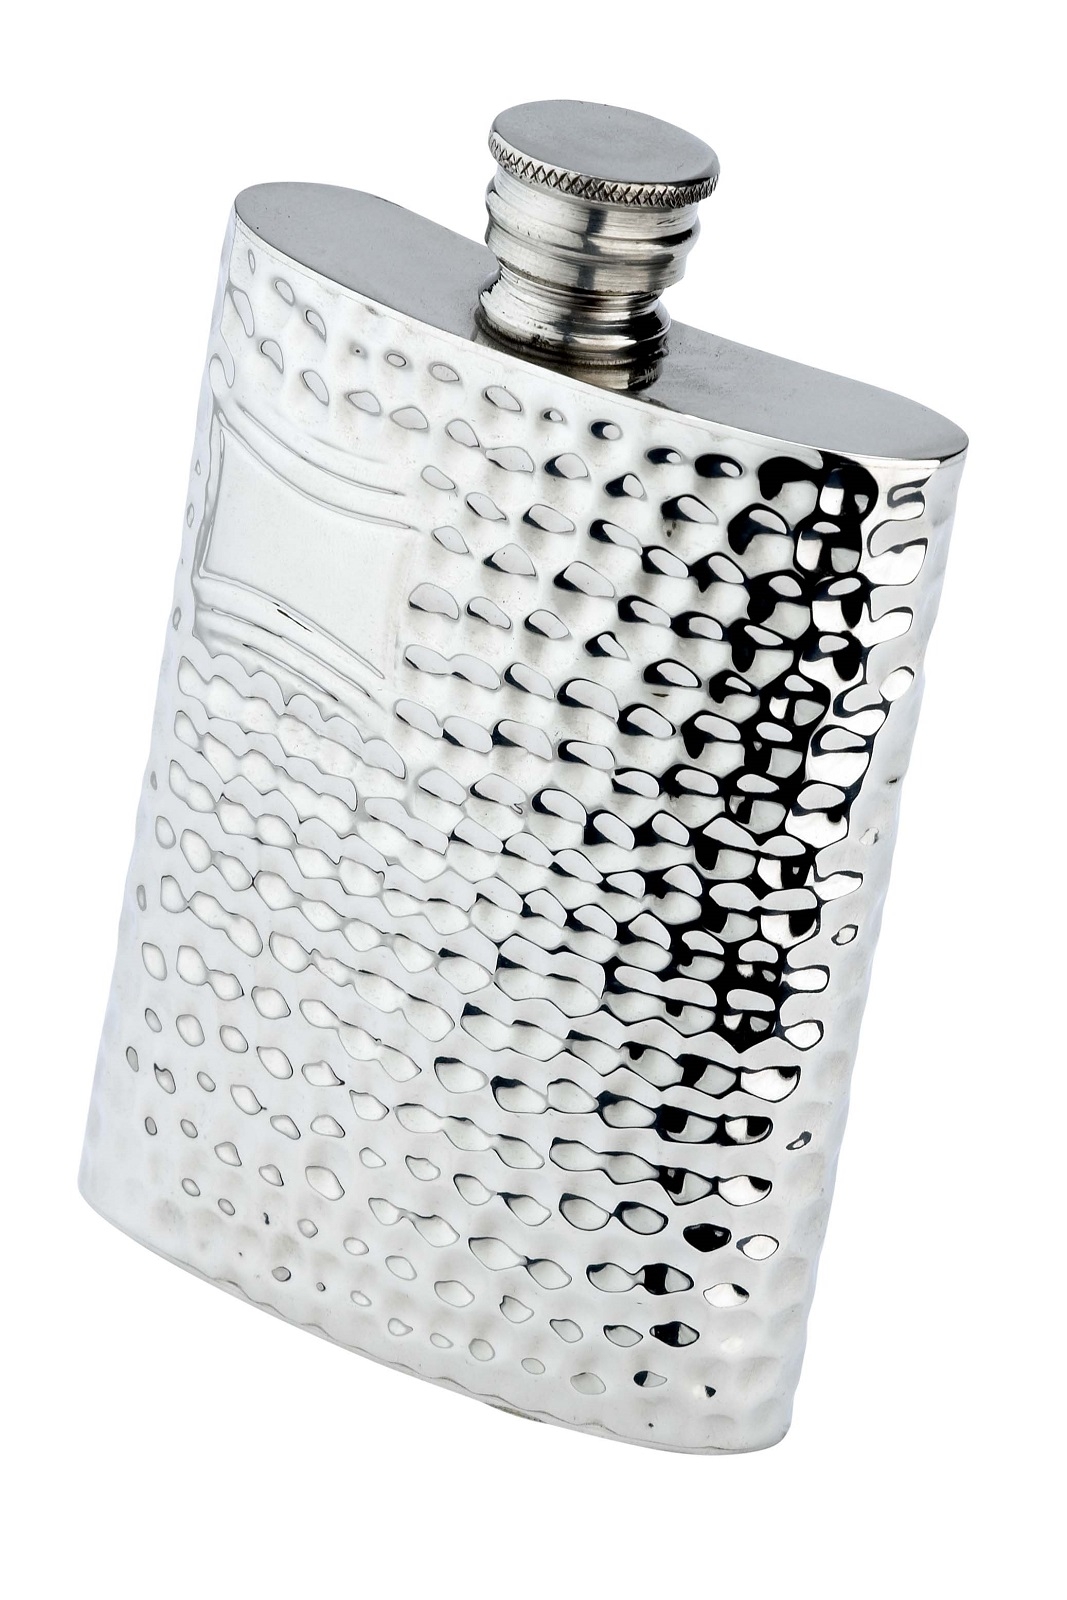 Hammered Dimple Oblong English Pewter Flask